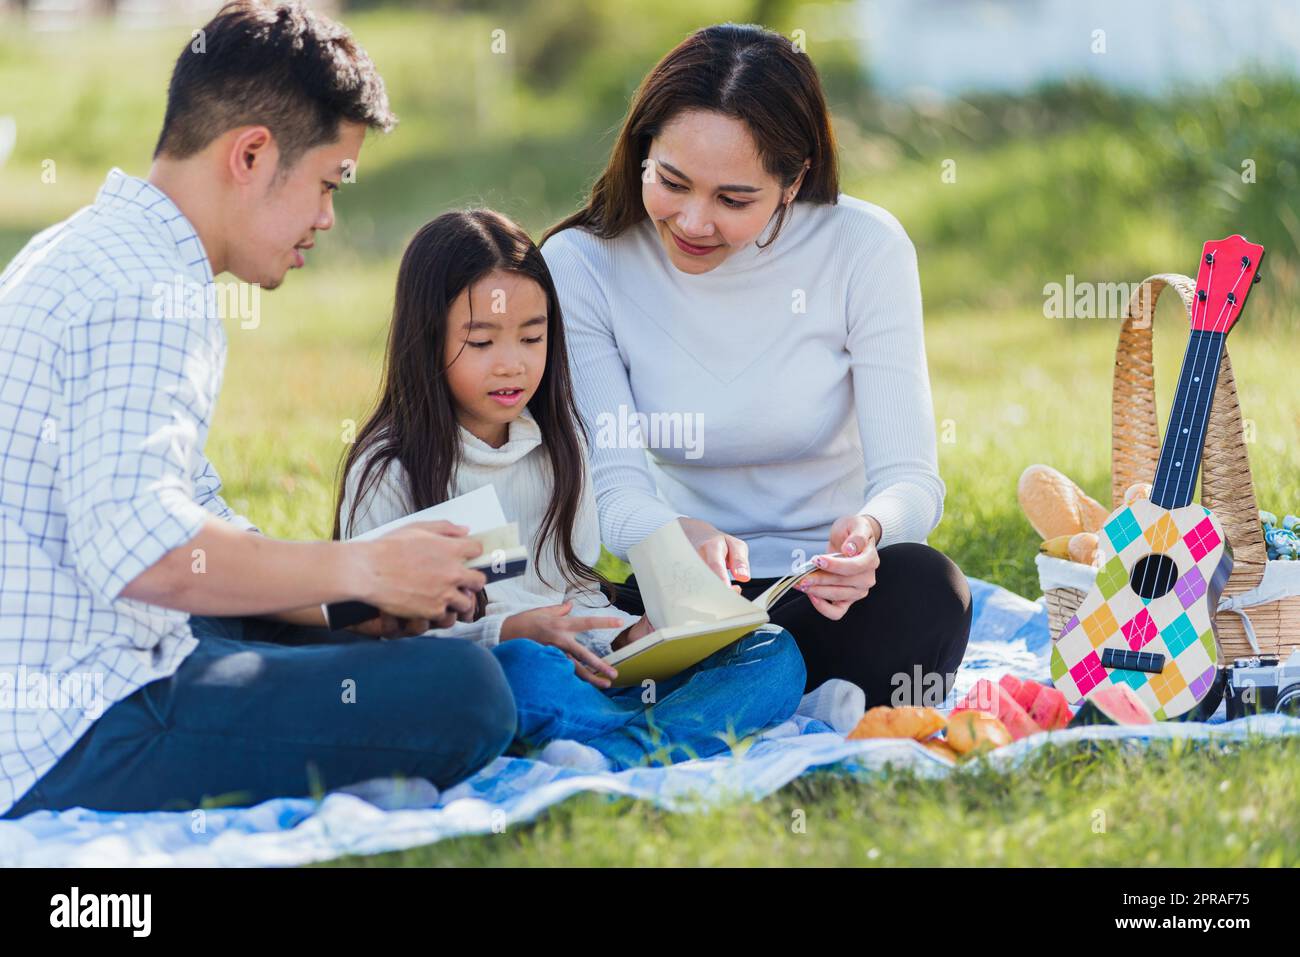 Asian family having fun and enjoying outdoor on picnic blanket reading book in park Stock Photo